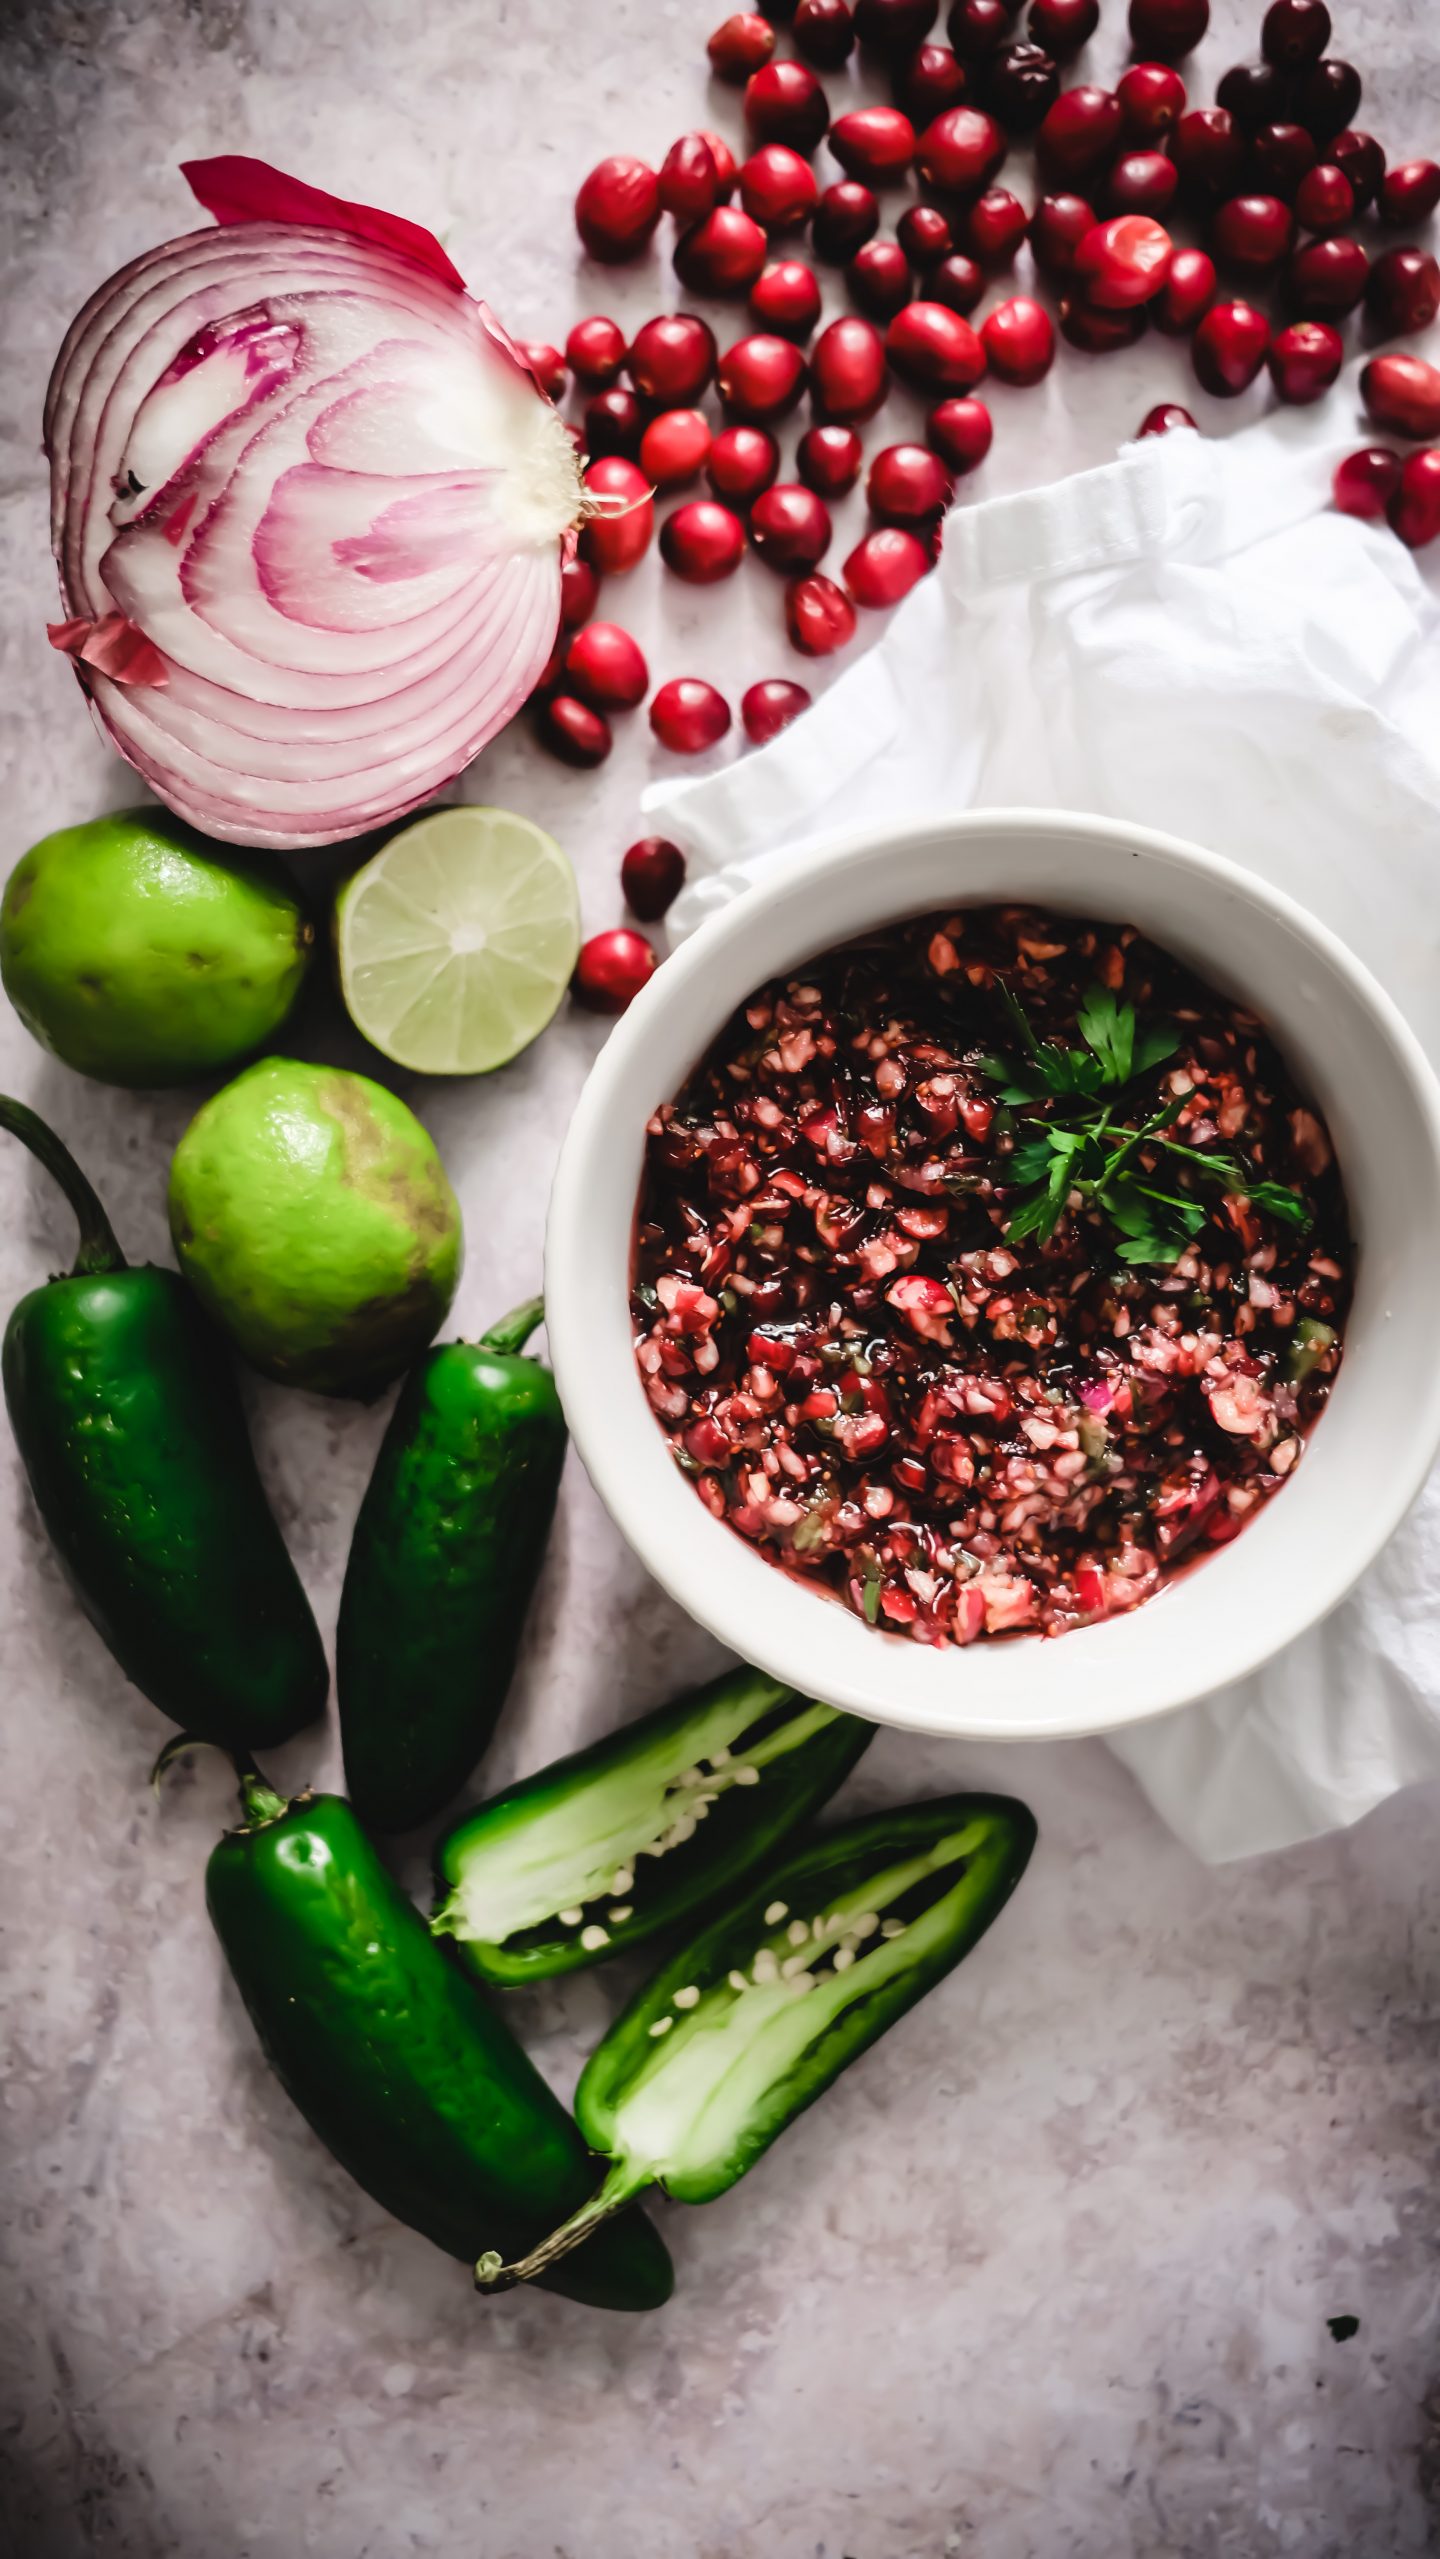 Lifestyle Blogger Chocolate and Lace shares her recipe for Sweet and Spicy Cranberry Jalepeno Salsa